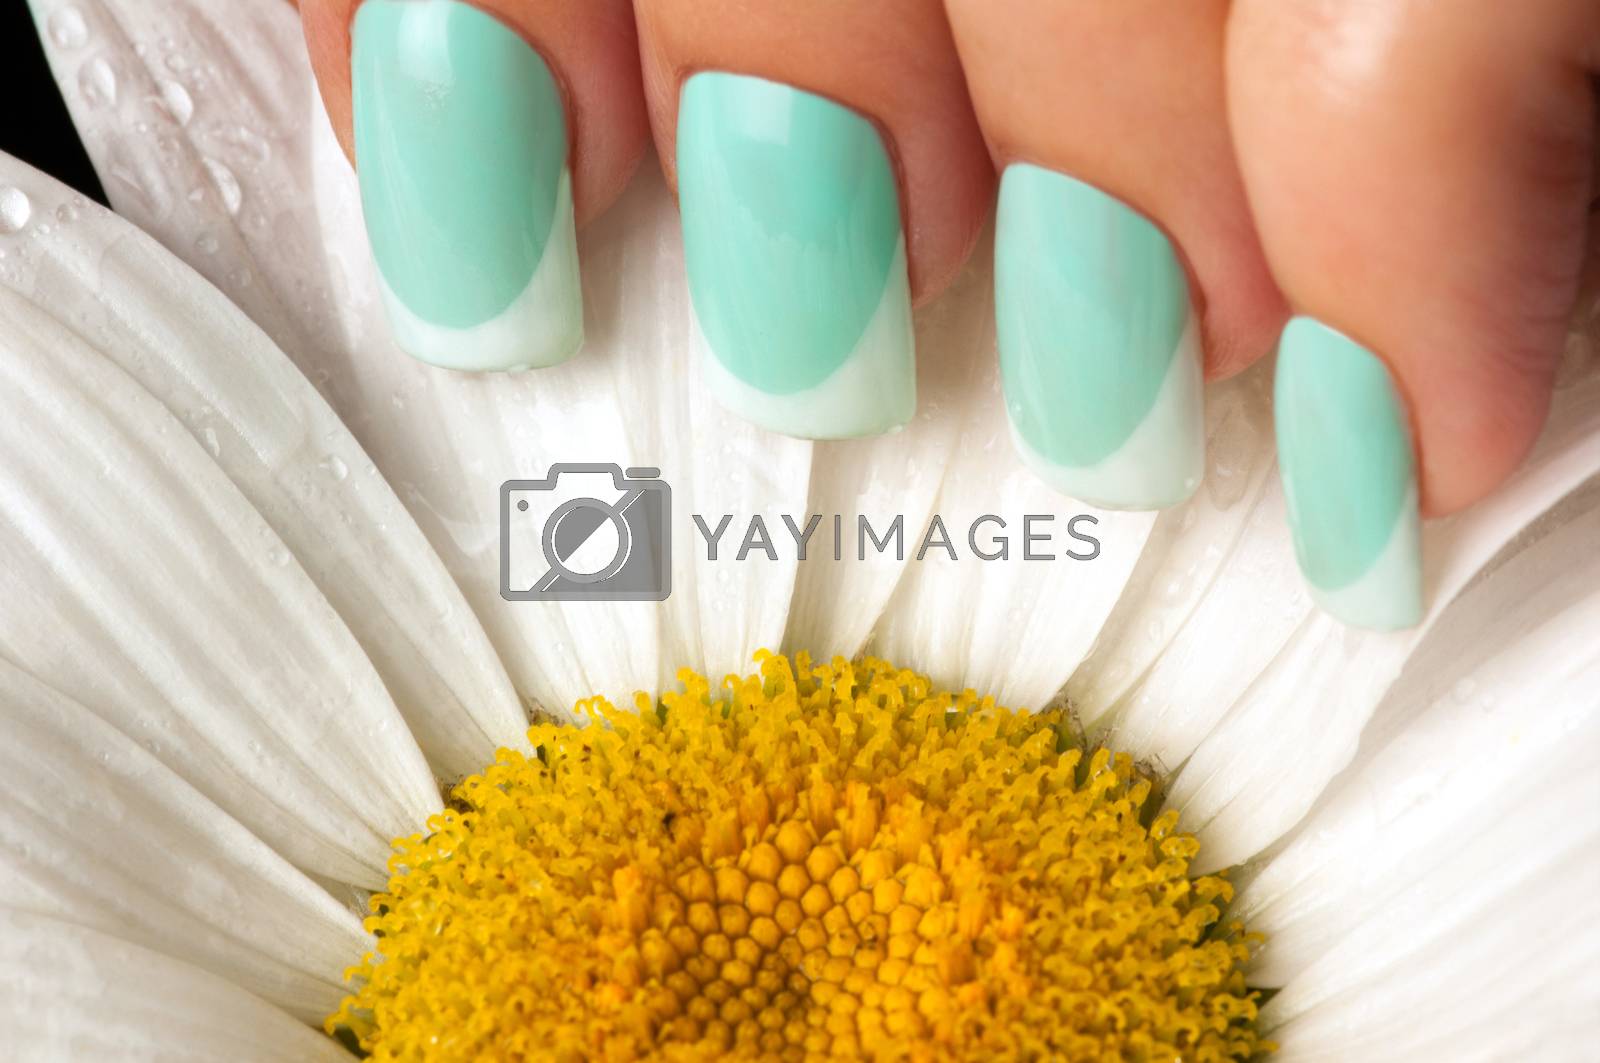 Royalty free image of Beautiful nails and flower. by SergeyTay